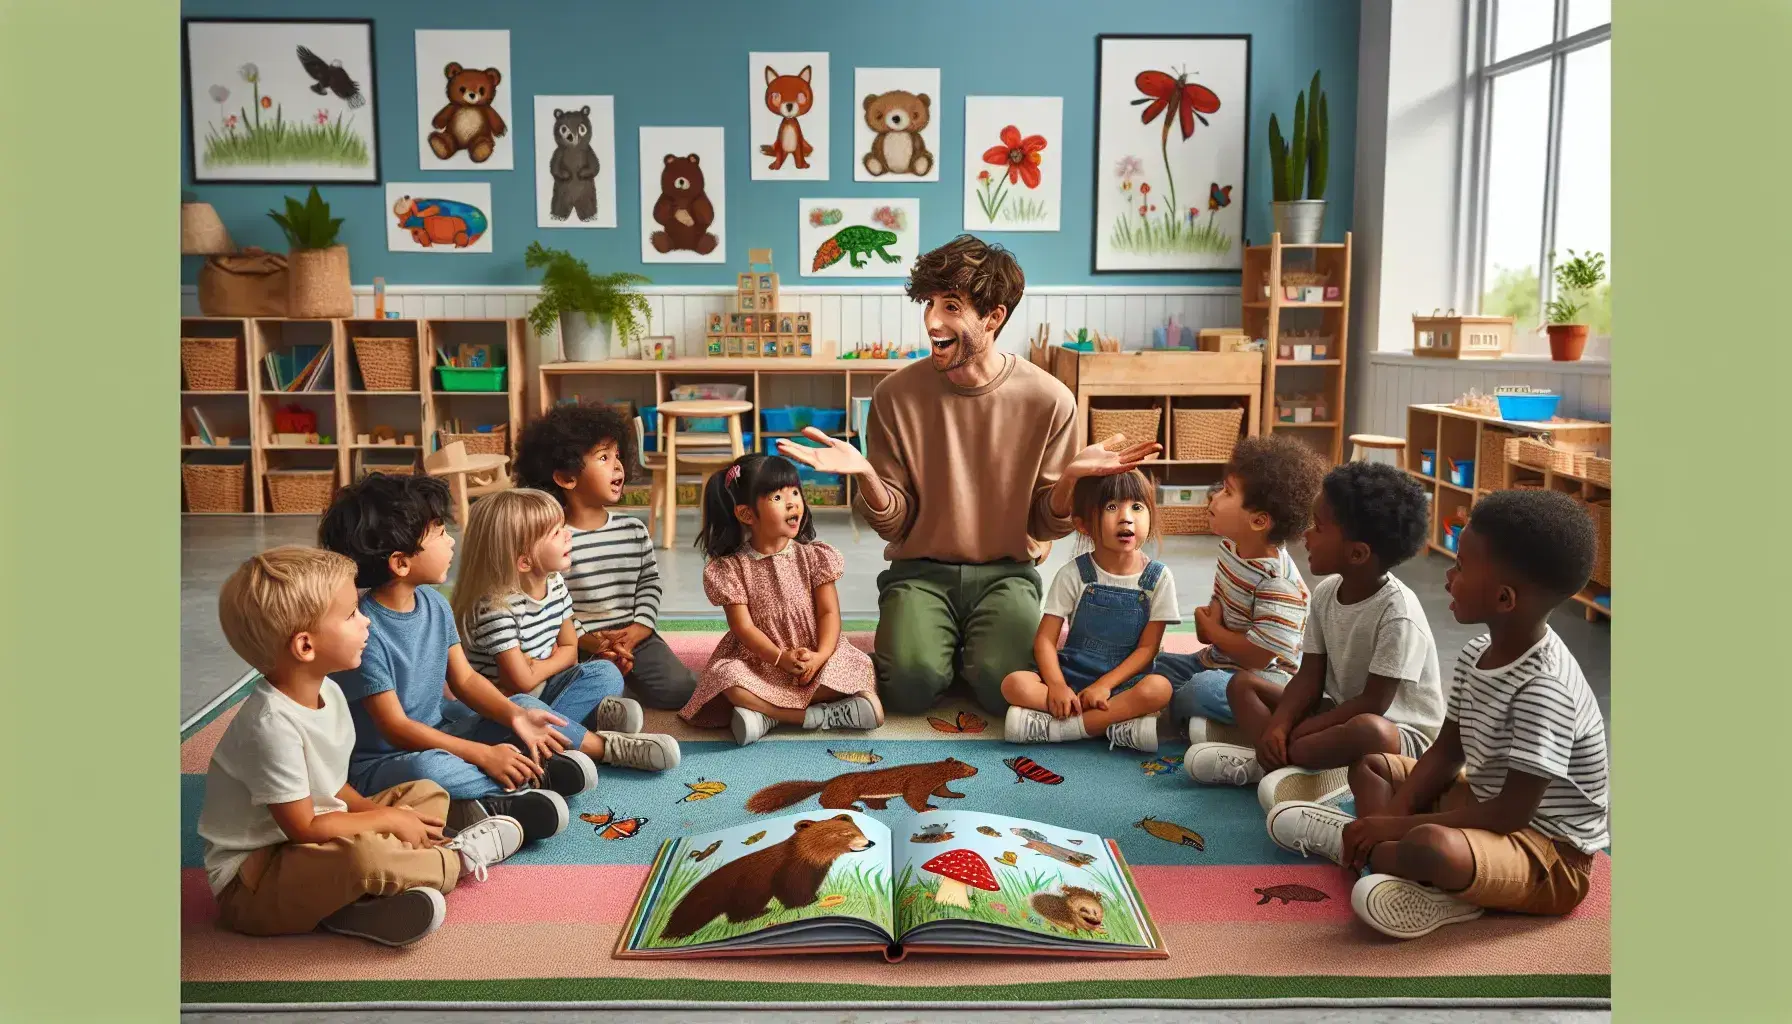 Diverse group of young children engaged in story time with a teacher in a colorful early education classroom, with a large illustrated book open on the rug.